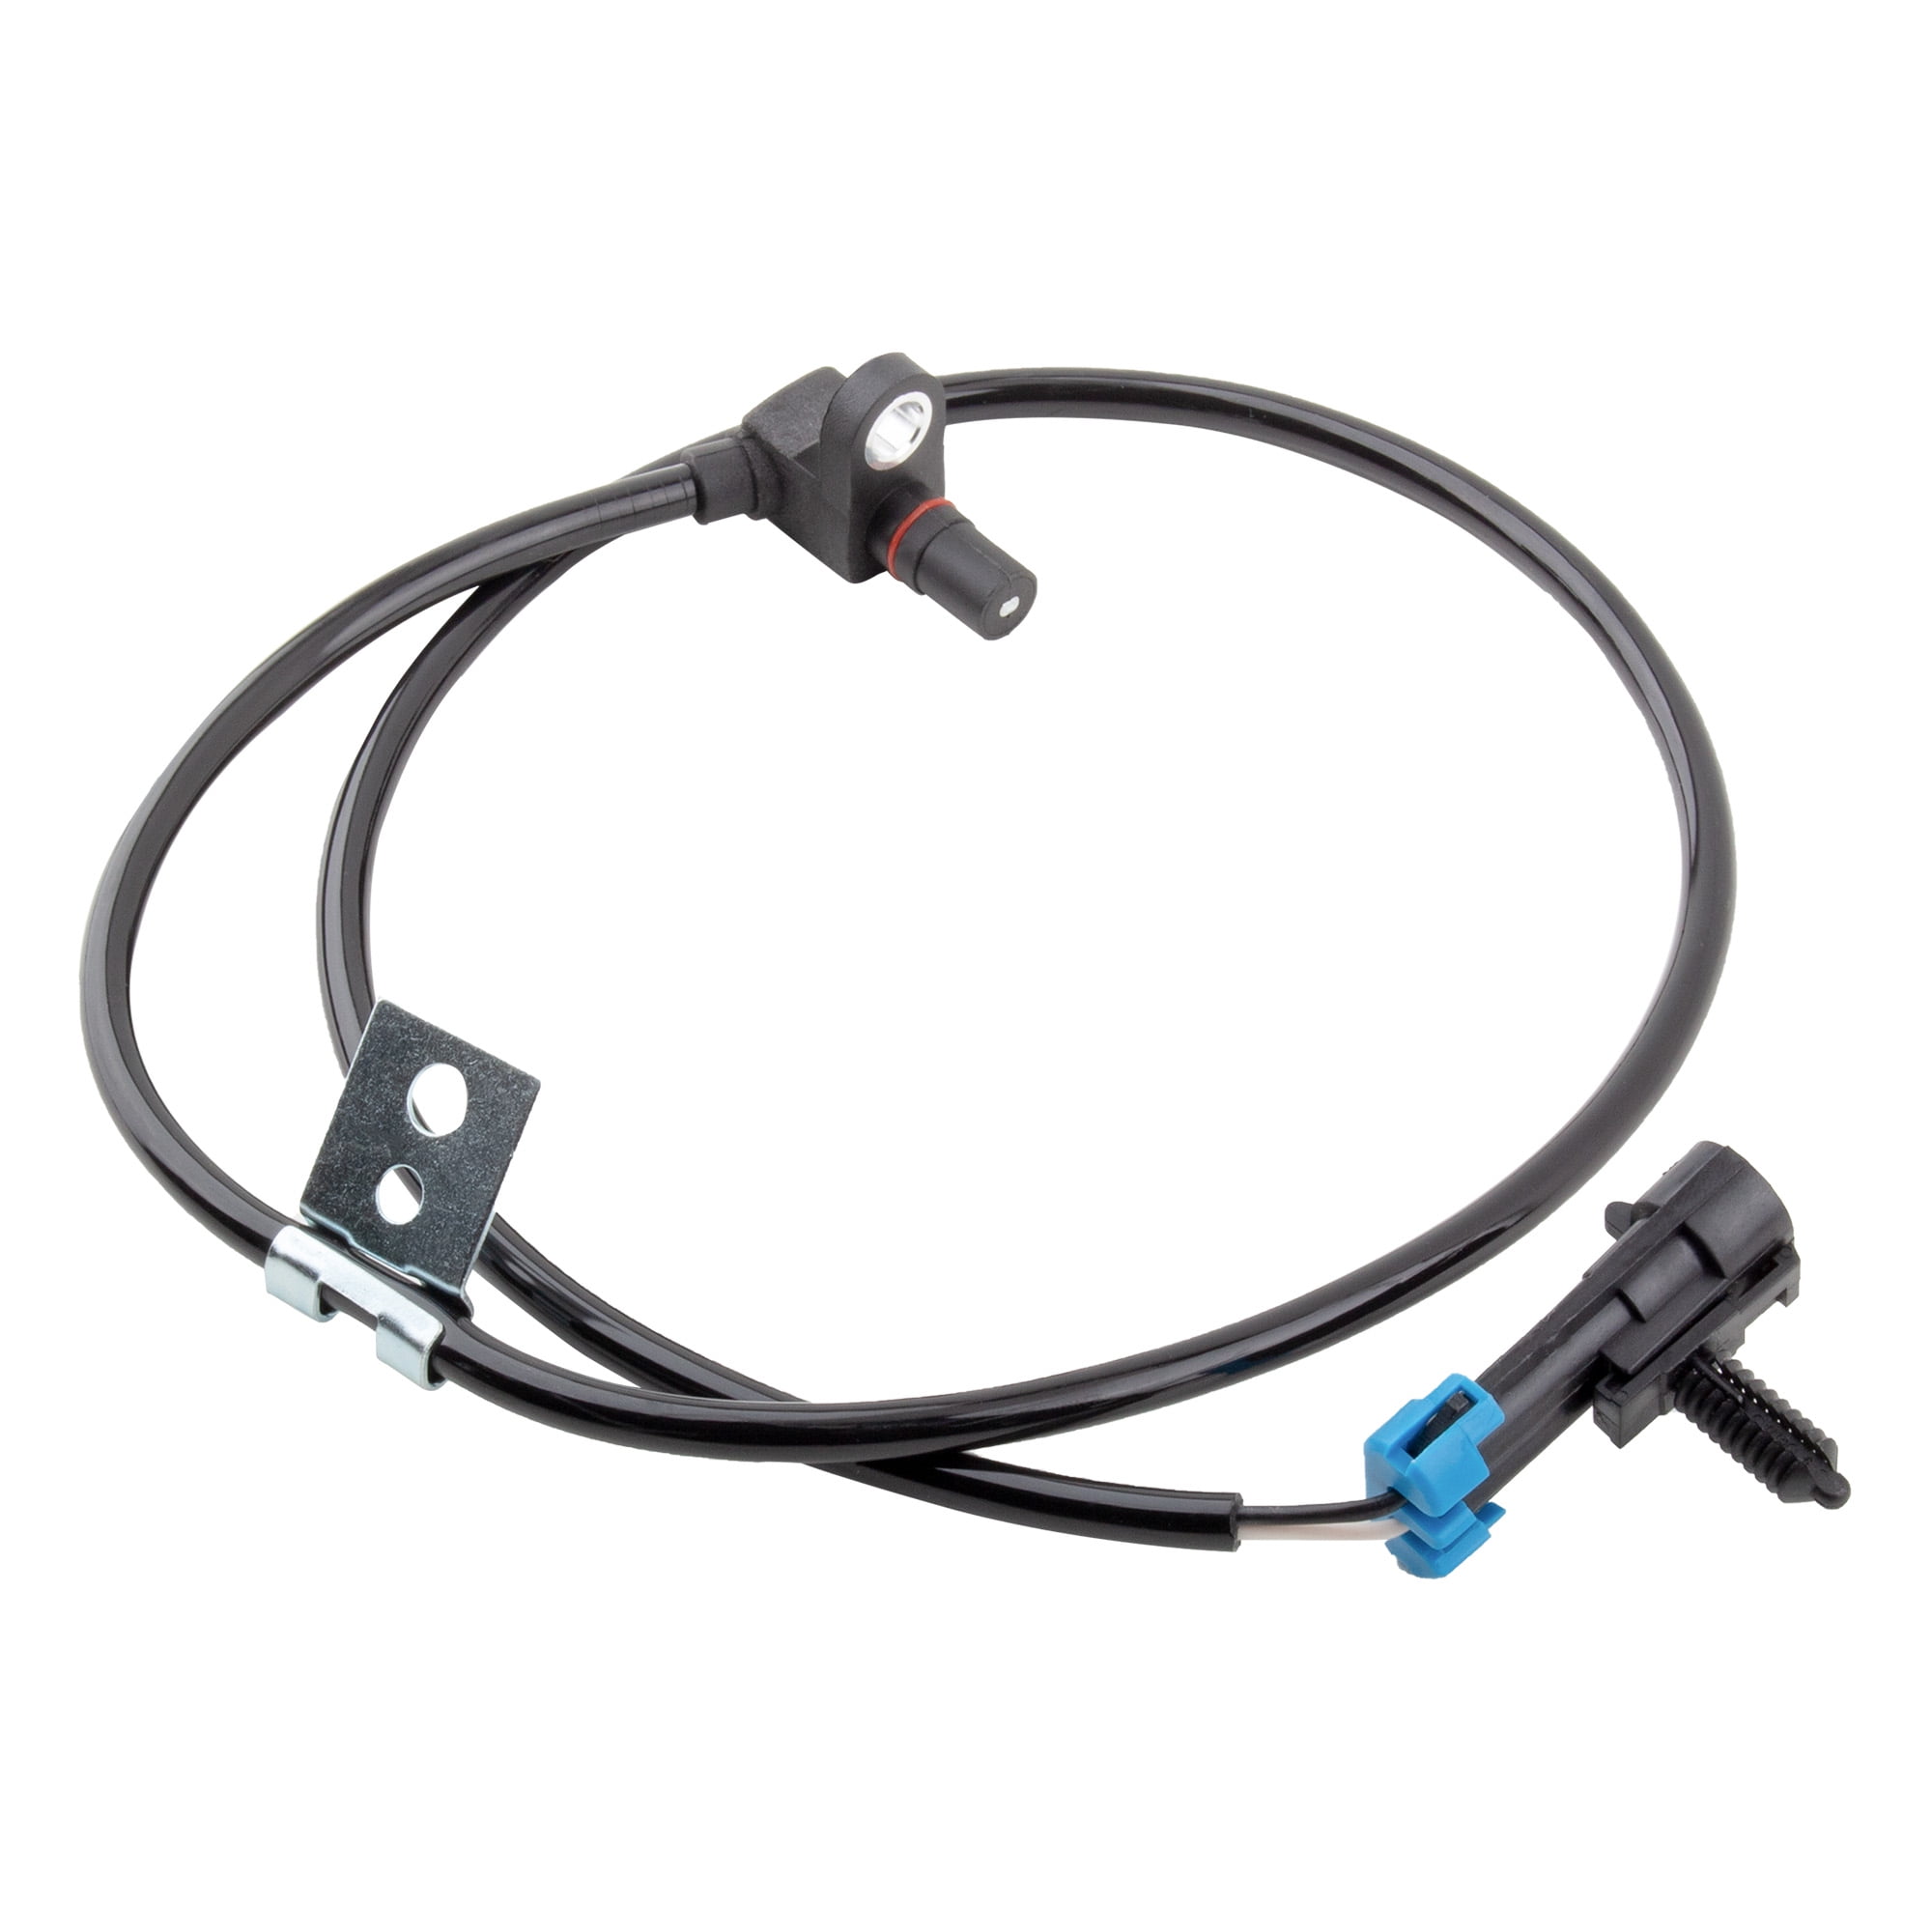 98-04 Chevy S10 98-01 GMC Jimmy ABS Wheel Speed Sensor Front Left and Right ALS480 For 98-05 Chevy Blazer 98-04 GMC Sonoma 